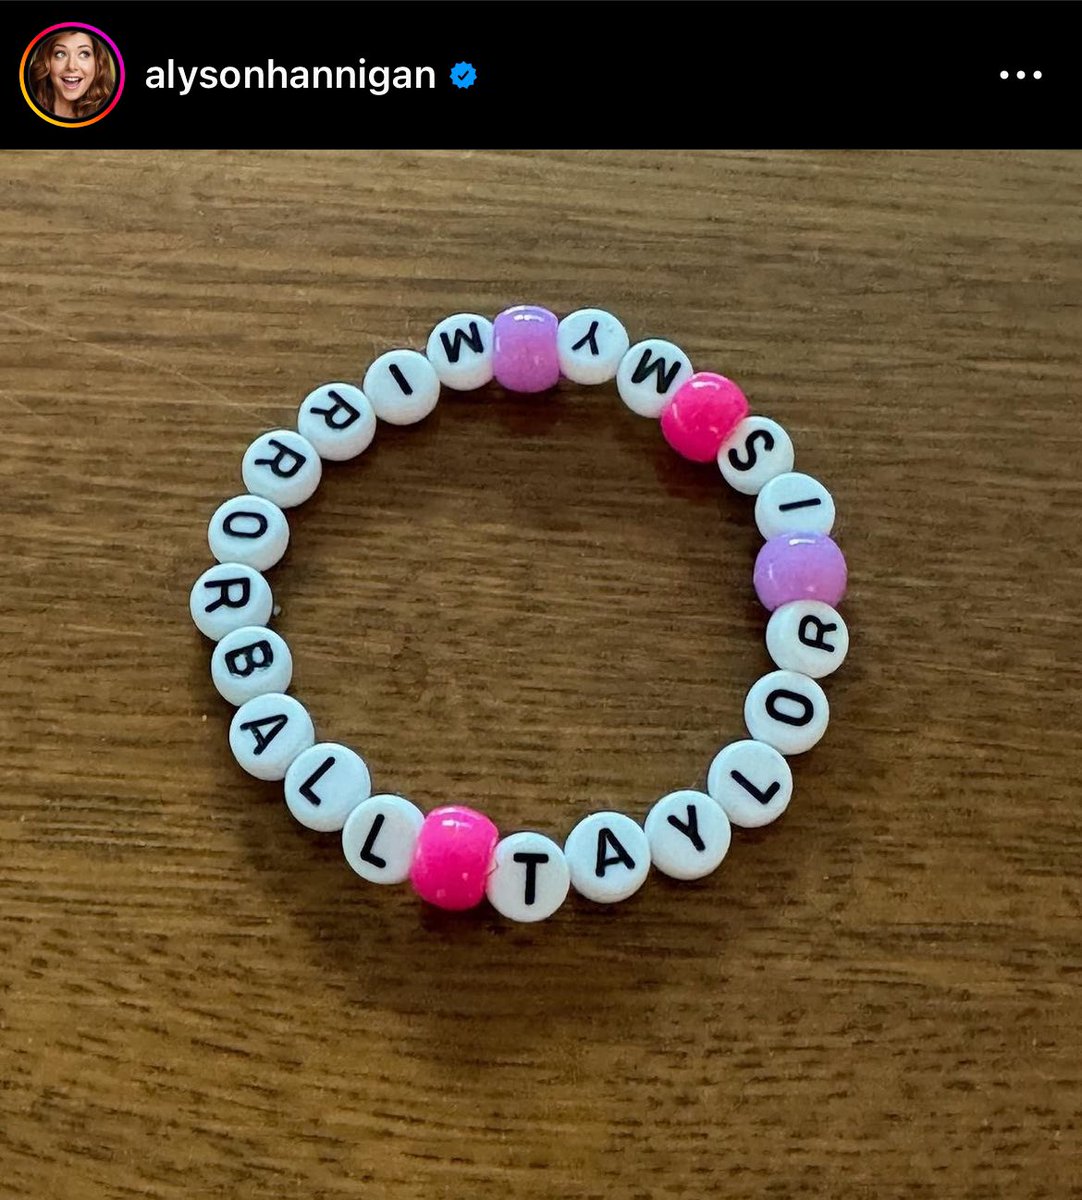 📲 | Actress Alyson Hannigan getting ready for Taylor themed night on @officialdwts via Instagram 

— “My entire household is getting ready for #TaylorSwiftNight !!! Swipe for the bracelet my daughters made me ❤️”